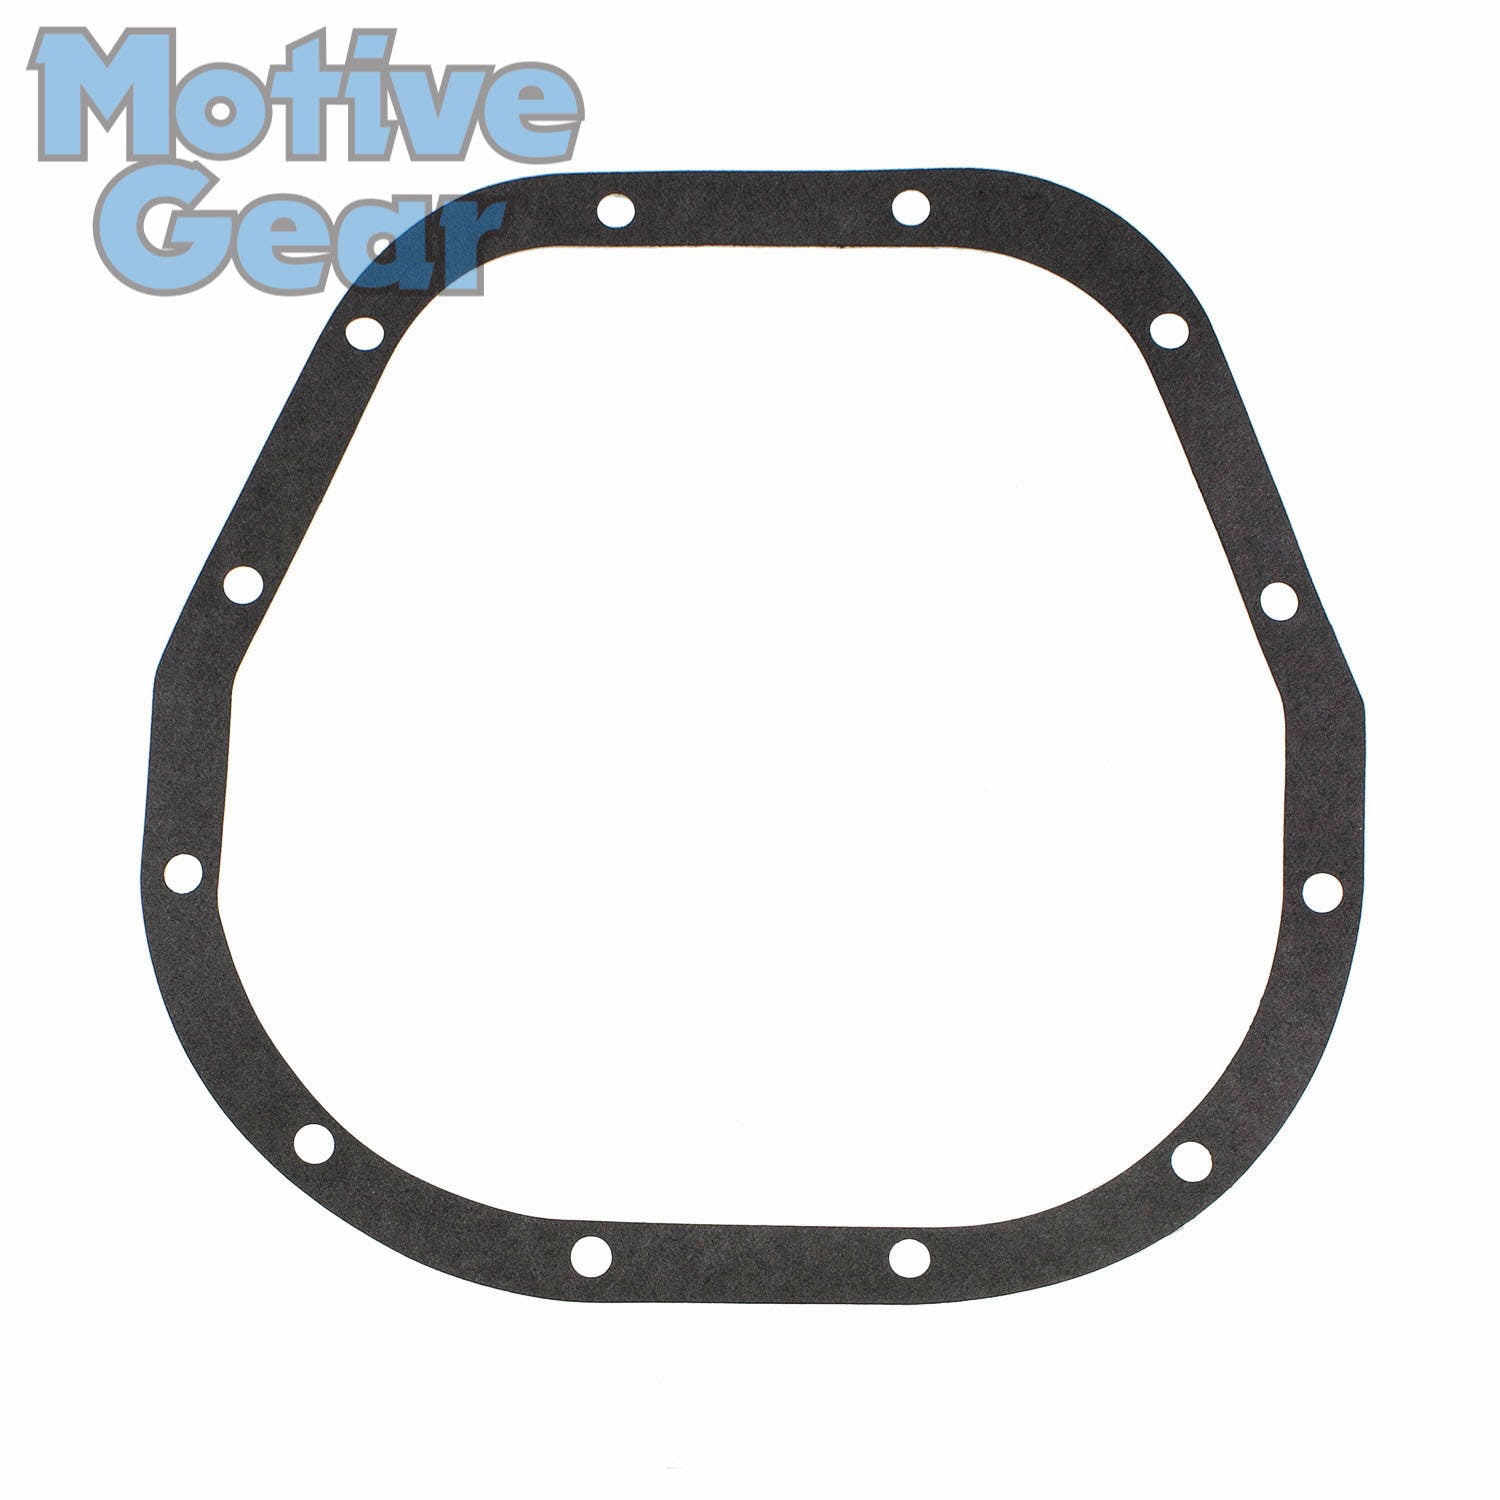 Motive Gear 5125 Differential Cover Gasket